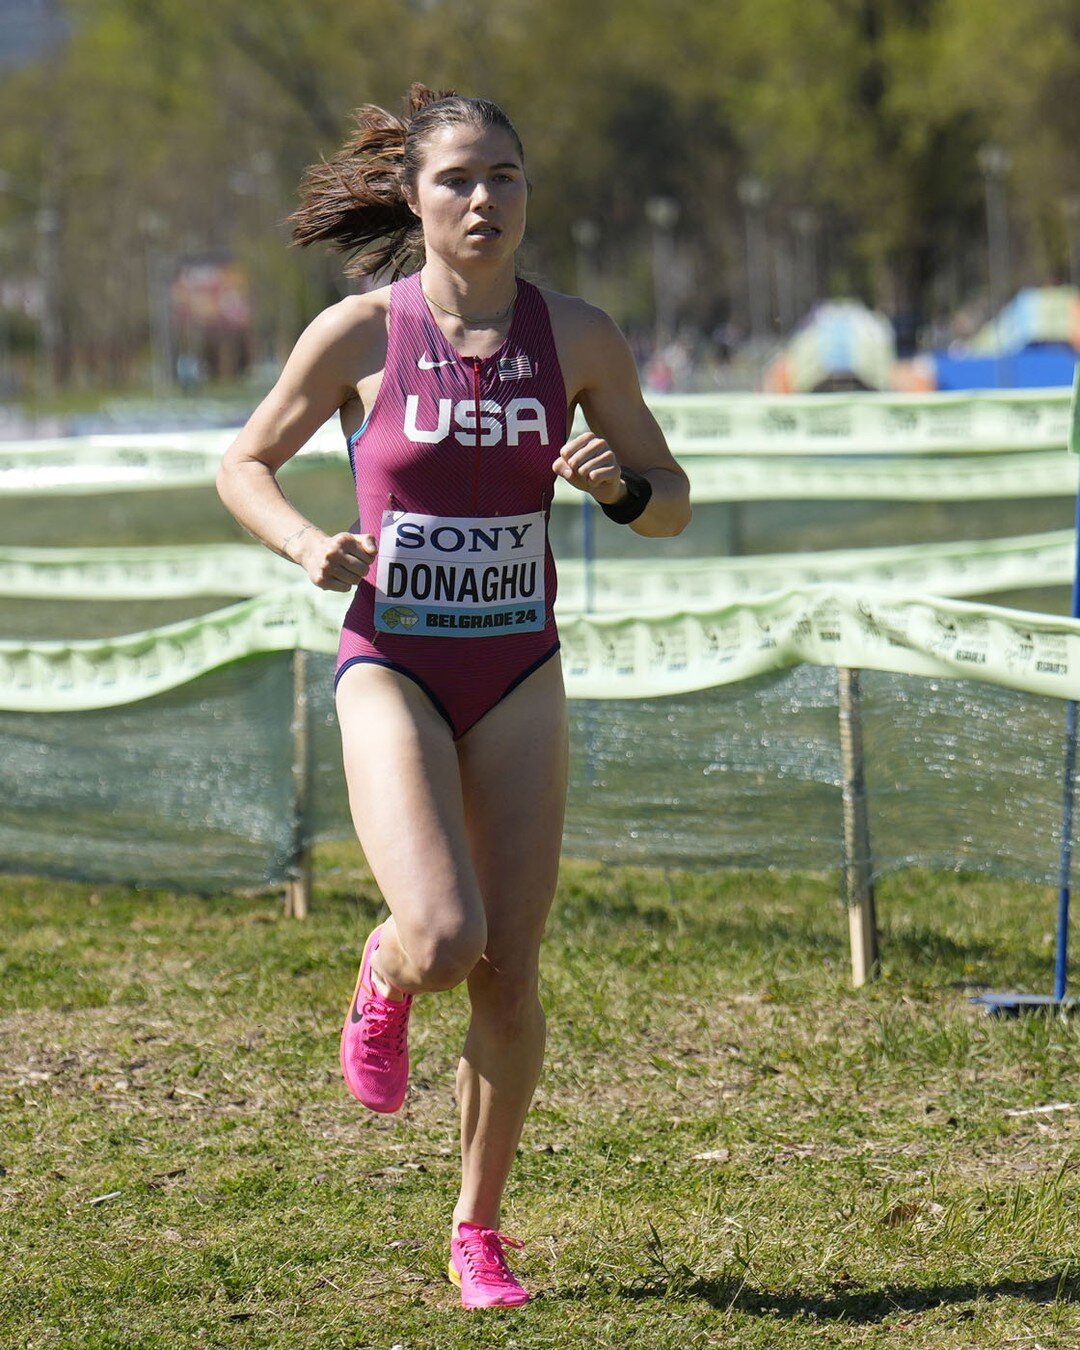 An absolute world-class run from Ella Donaghu at the World Cross Country Championship in Belgrade to put Team USA in medal contention. Ella posted the the second fast time of all competitors on leg 2 of the 4 x 2K relay. PC: Miyazaki